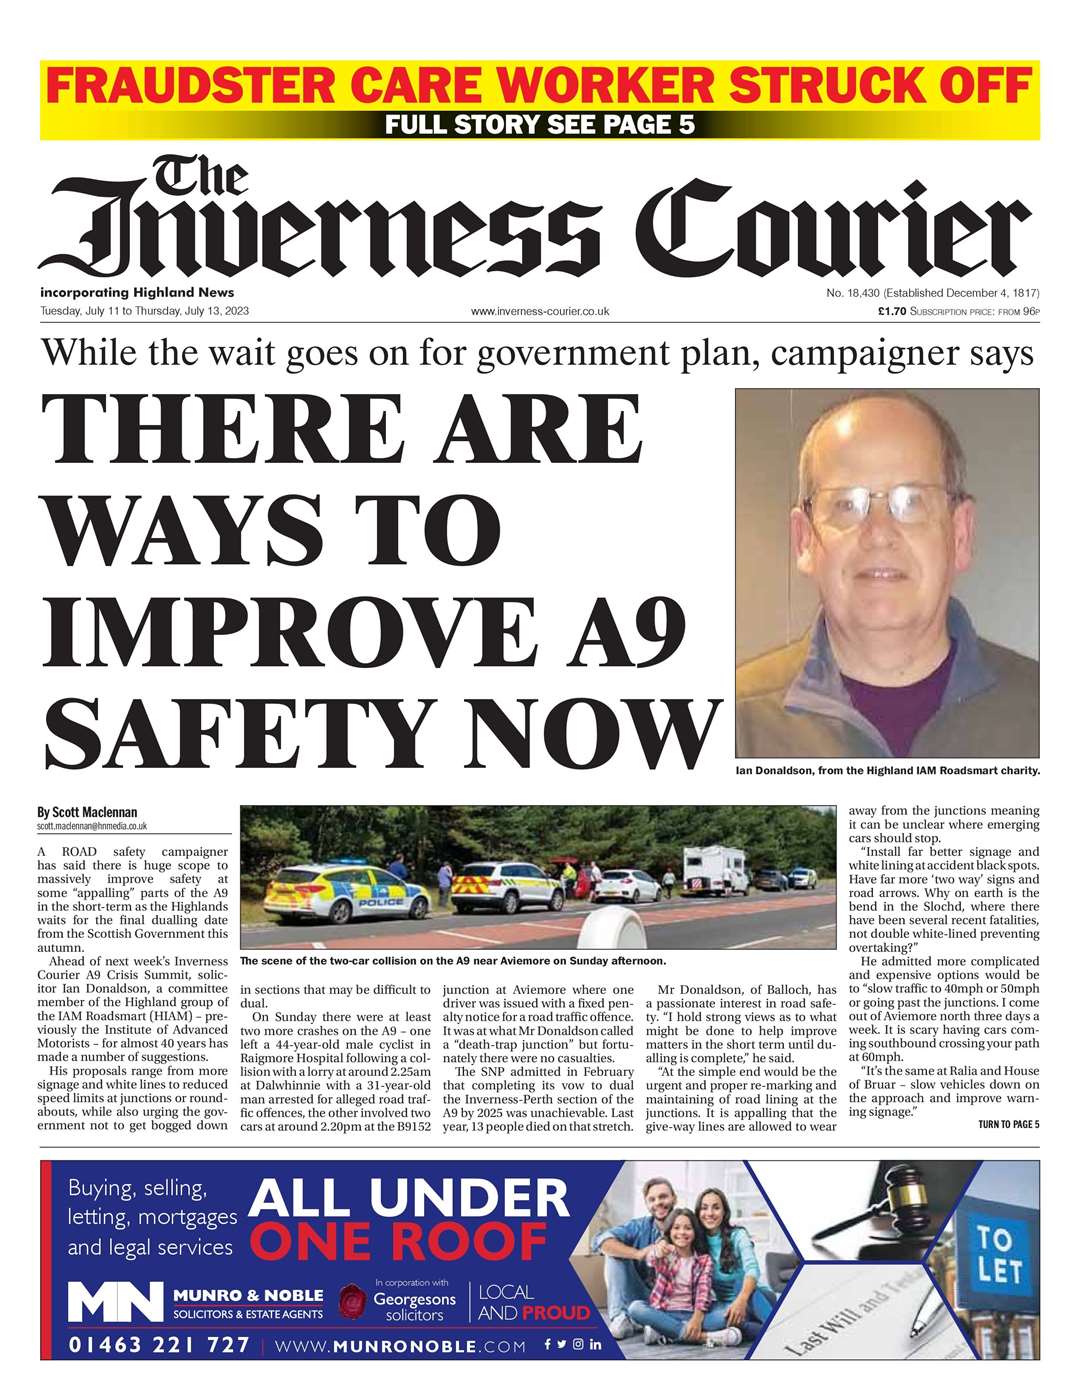 The Inverness Courier, July 11, front page.